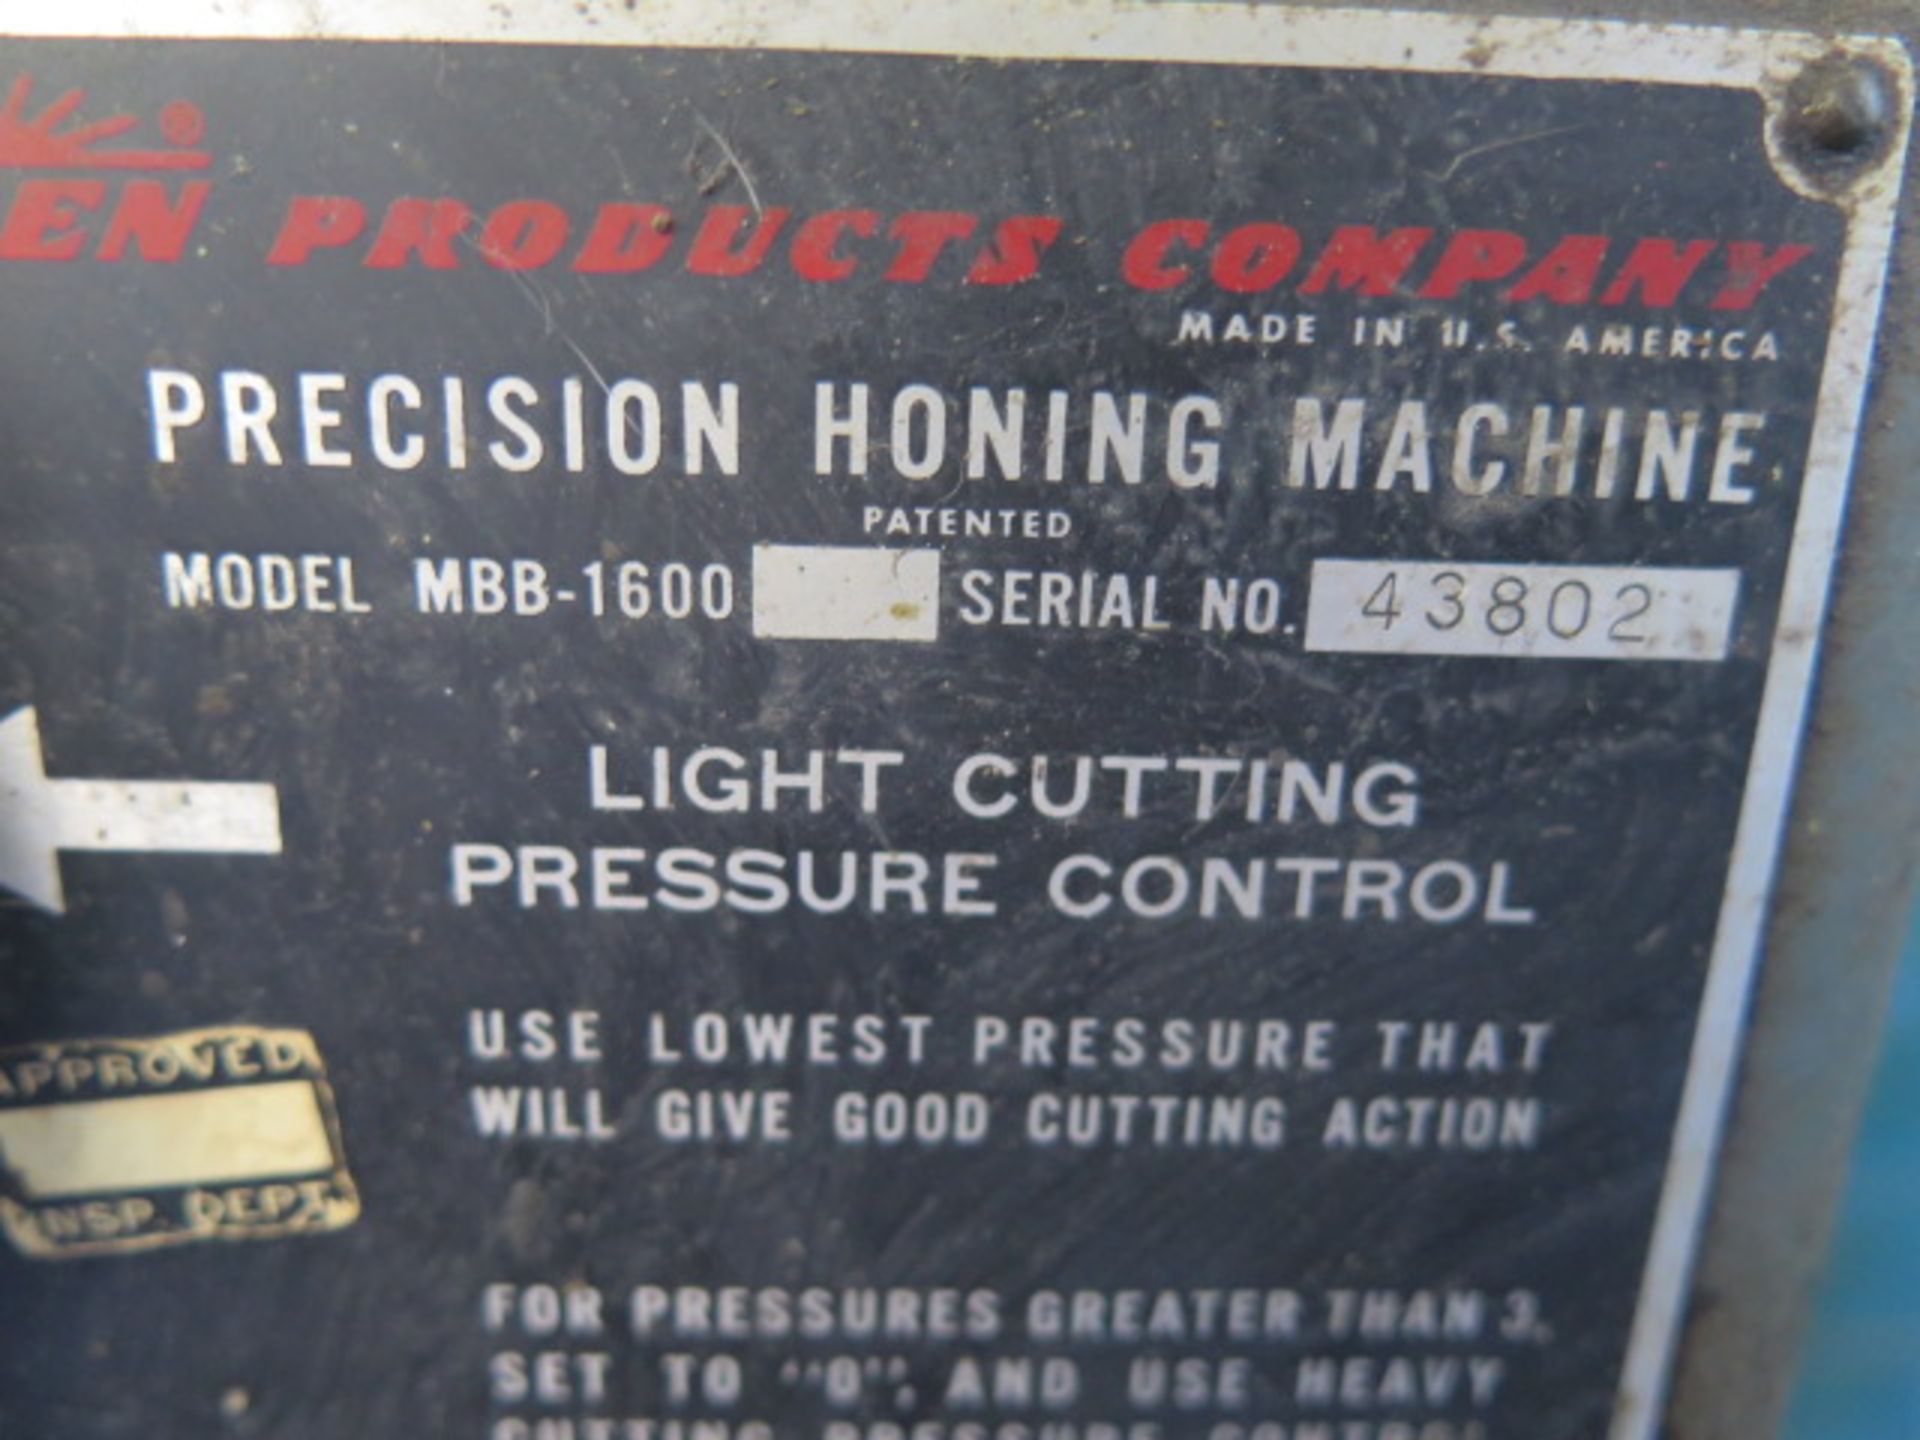 Sunnen MBB-1600 Precision Honing Machine s/n 43802 w/ Coolant (SOLD AS-IS - NO WARRANTY) - Image 8 of 8